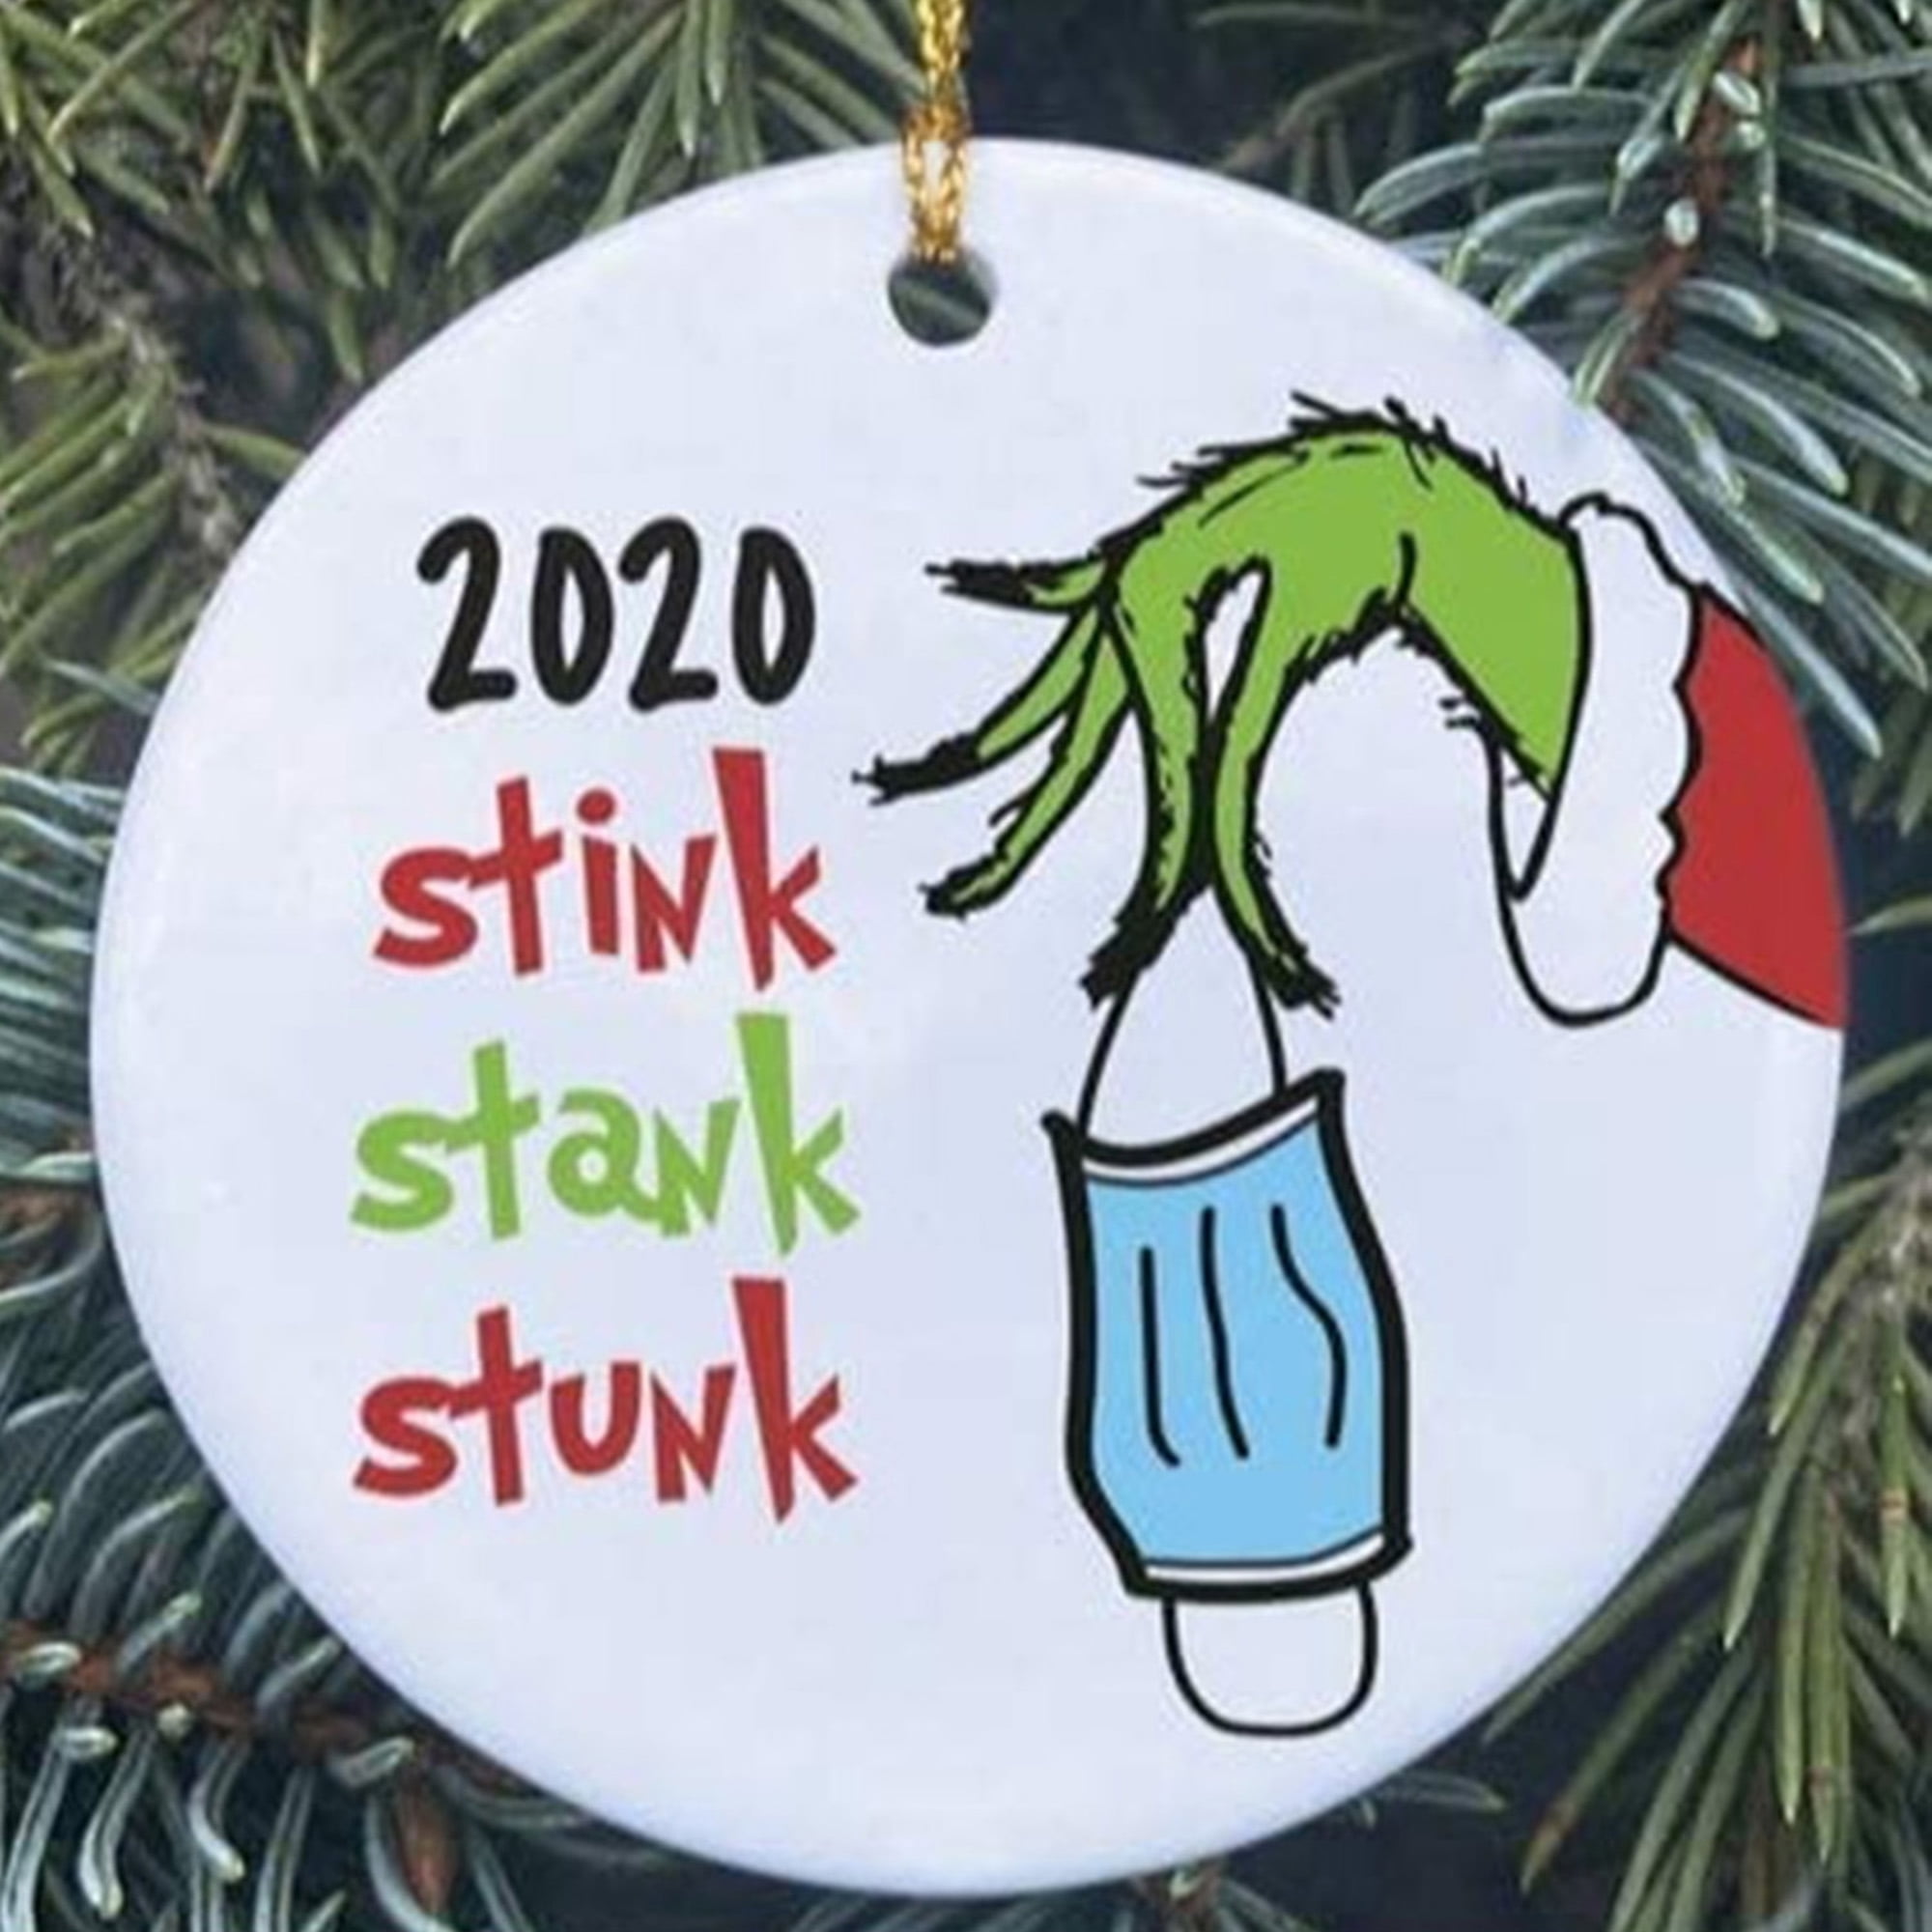 Mr. and Mrs. E Christmas Tree Decorations Hanging Pendant 2021 Grinch Hand Christmas Ornament,Unique Stink Stank Stunk Grinch Ornaments for Christmas Tree Decor